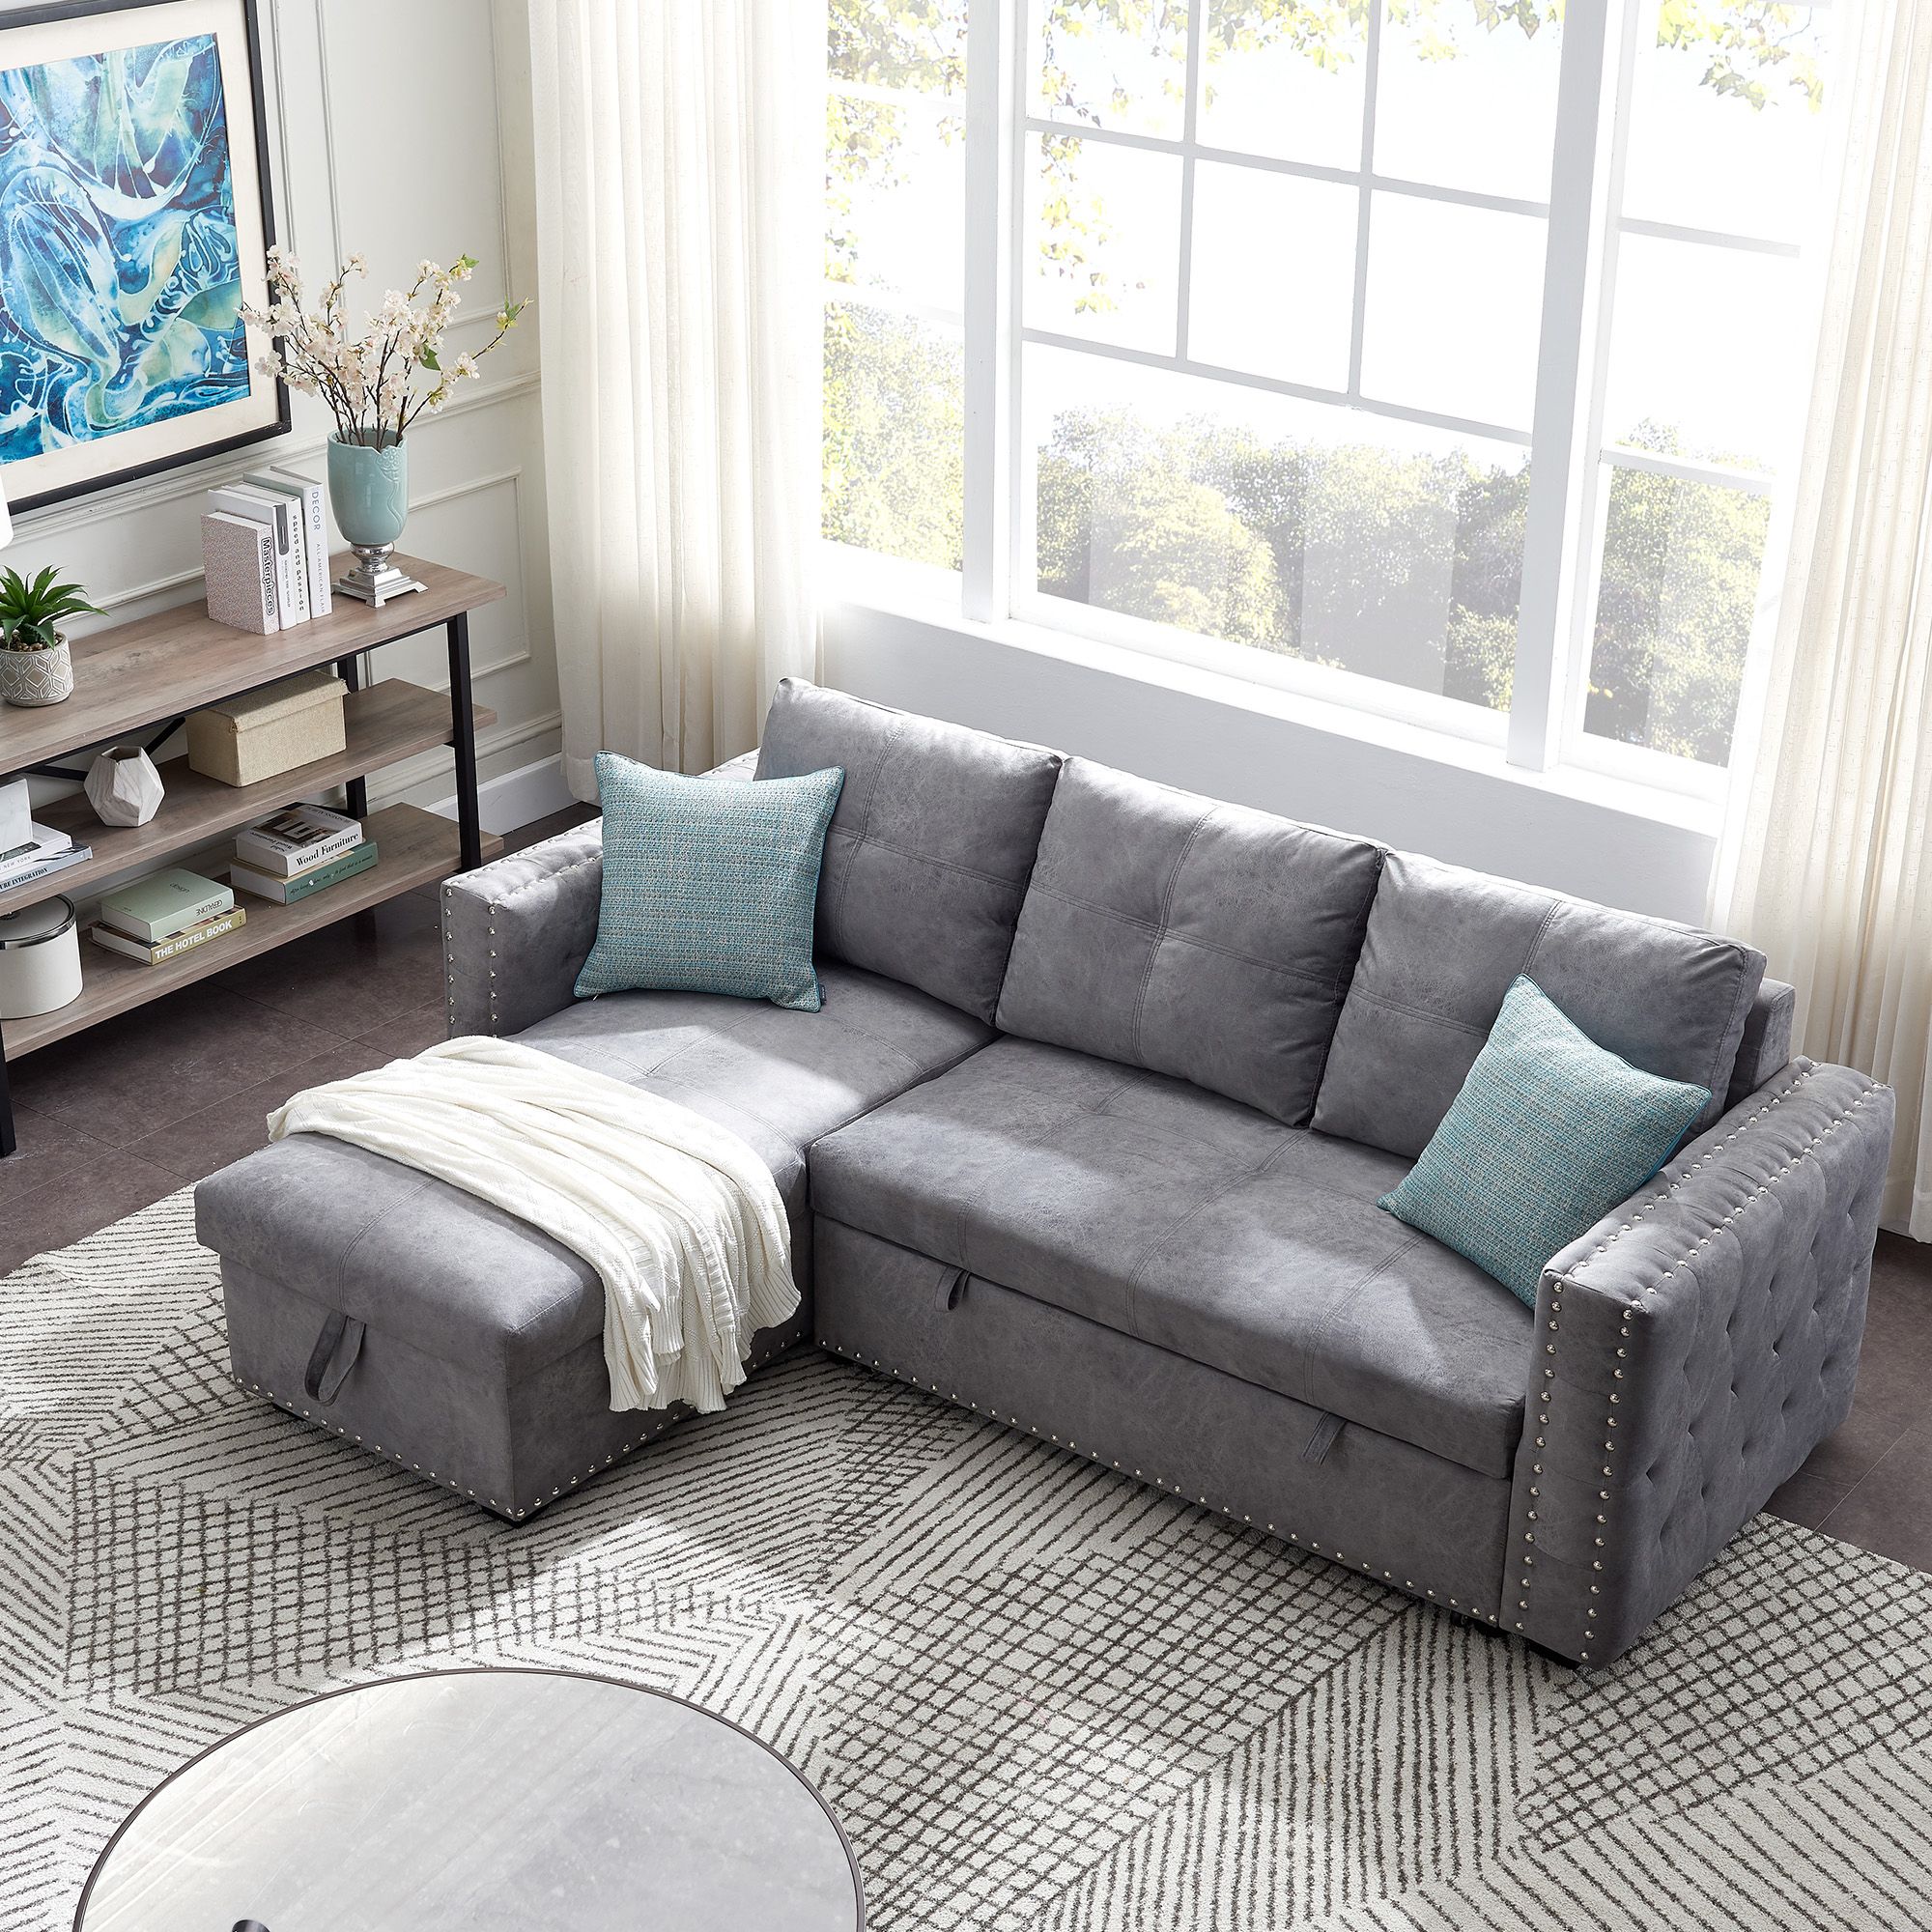 Featured Photo of 15 Best Ideas Live It Cozy Sectional Sofa Beds with Storage